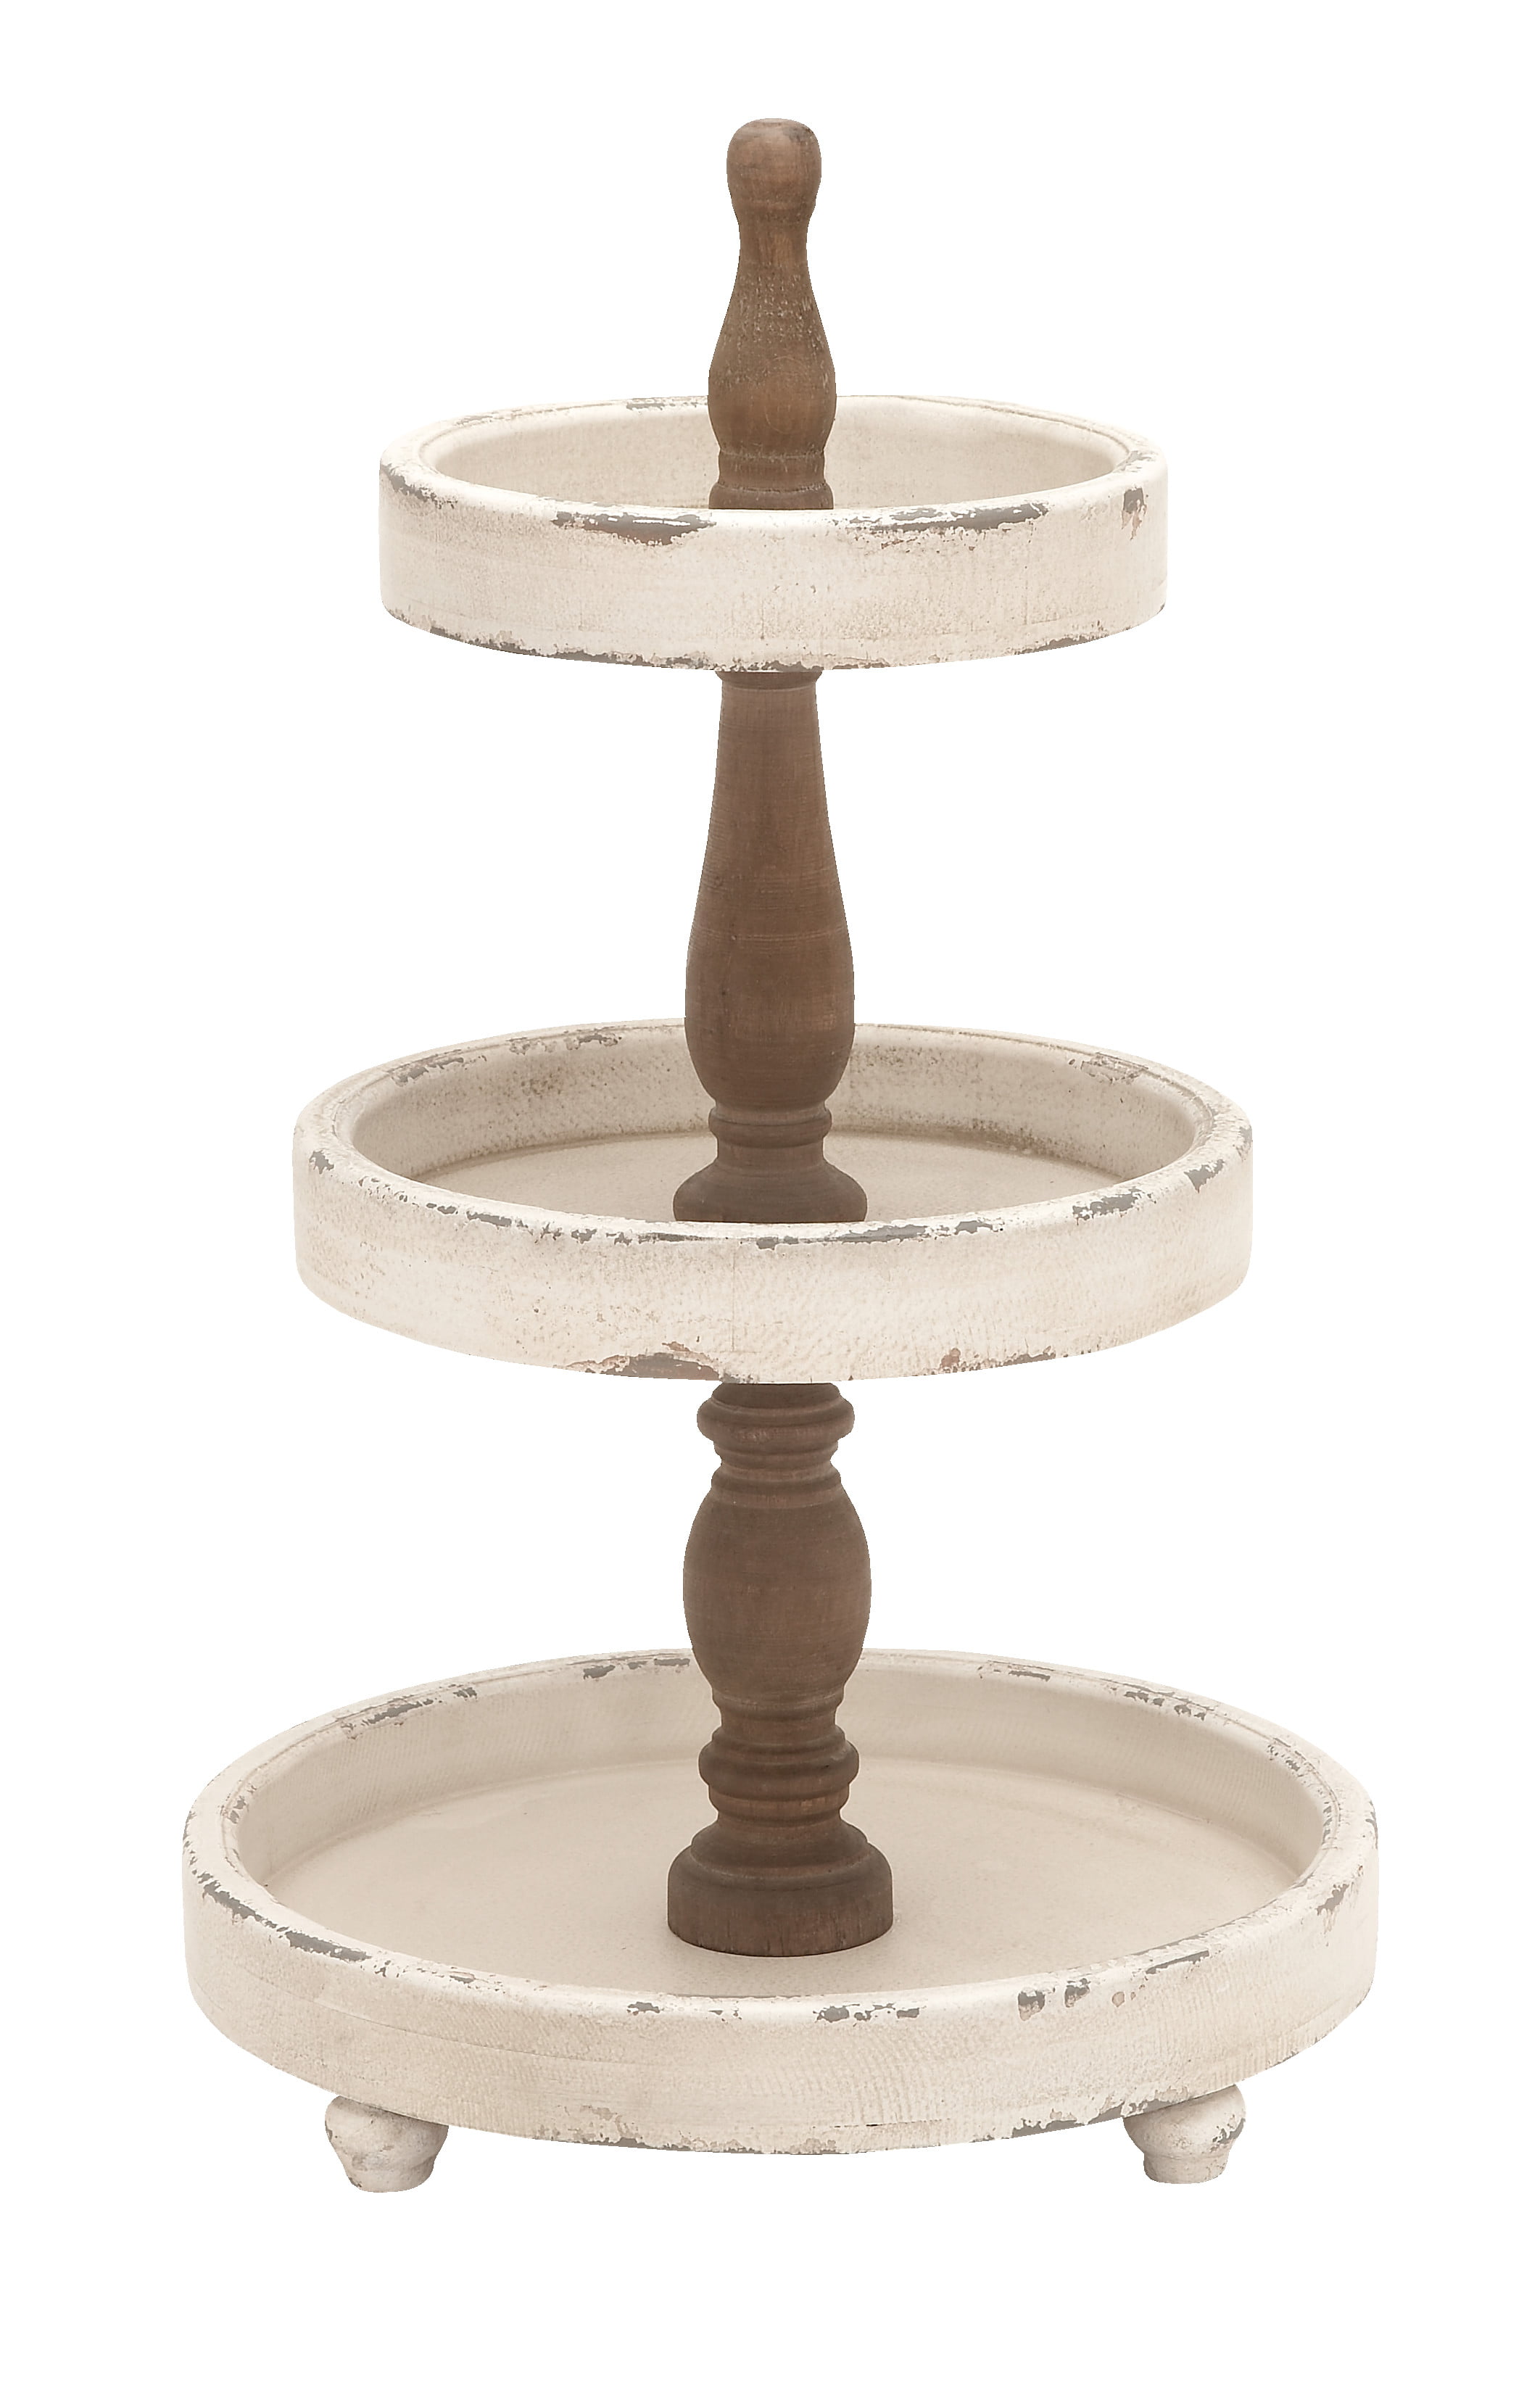 Wood Farmhouse 3 Tier Tray SensaCasa 3 Tiered Tray Three Tier Tray Adjustable to Two Trays: a Two Tiered Tray and a Decorative Tray White Rustic 3 Tier Tray or 2 Tier Tray and a single Tray